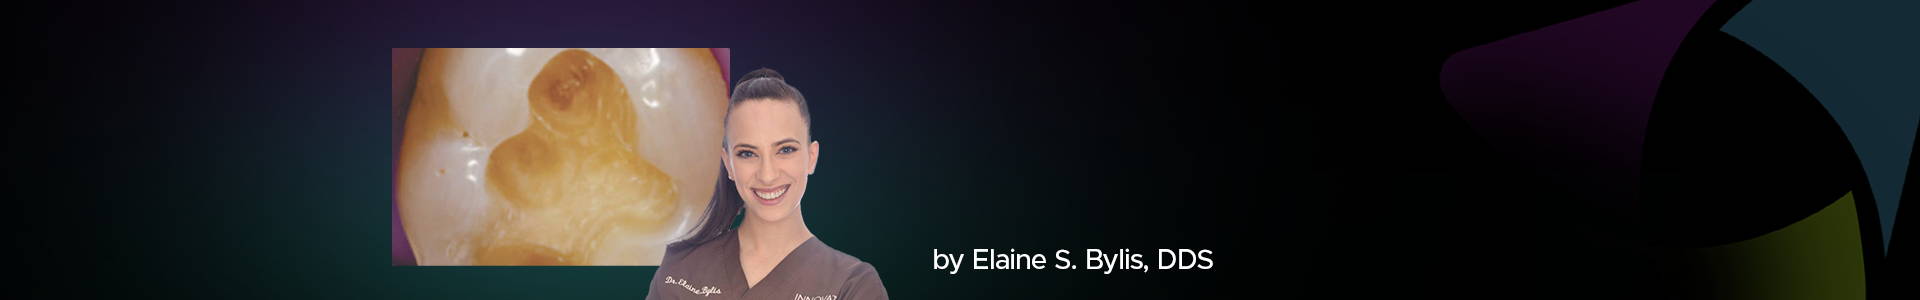 blog banner featuring Dr Elaine Bylis and a clinical case in the back